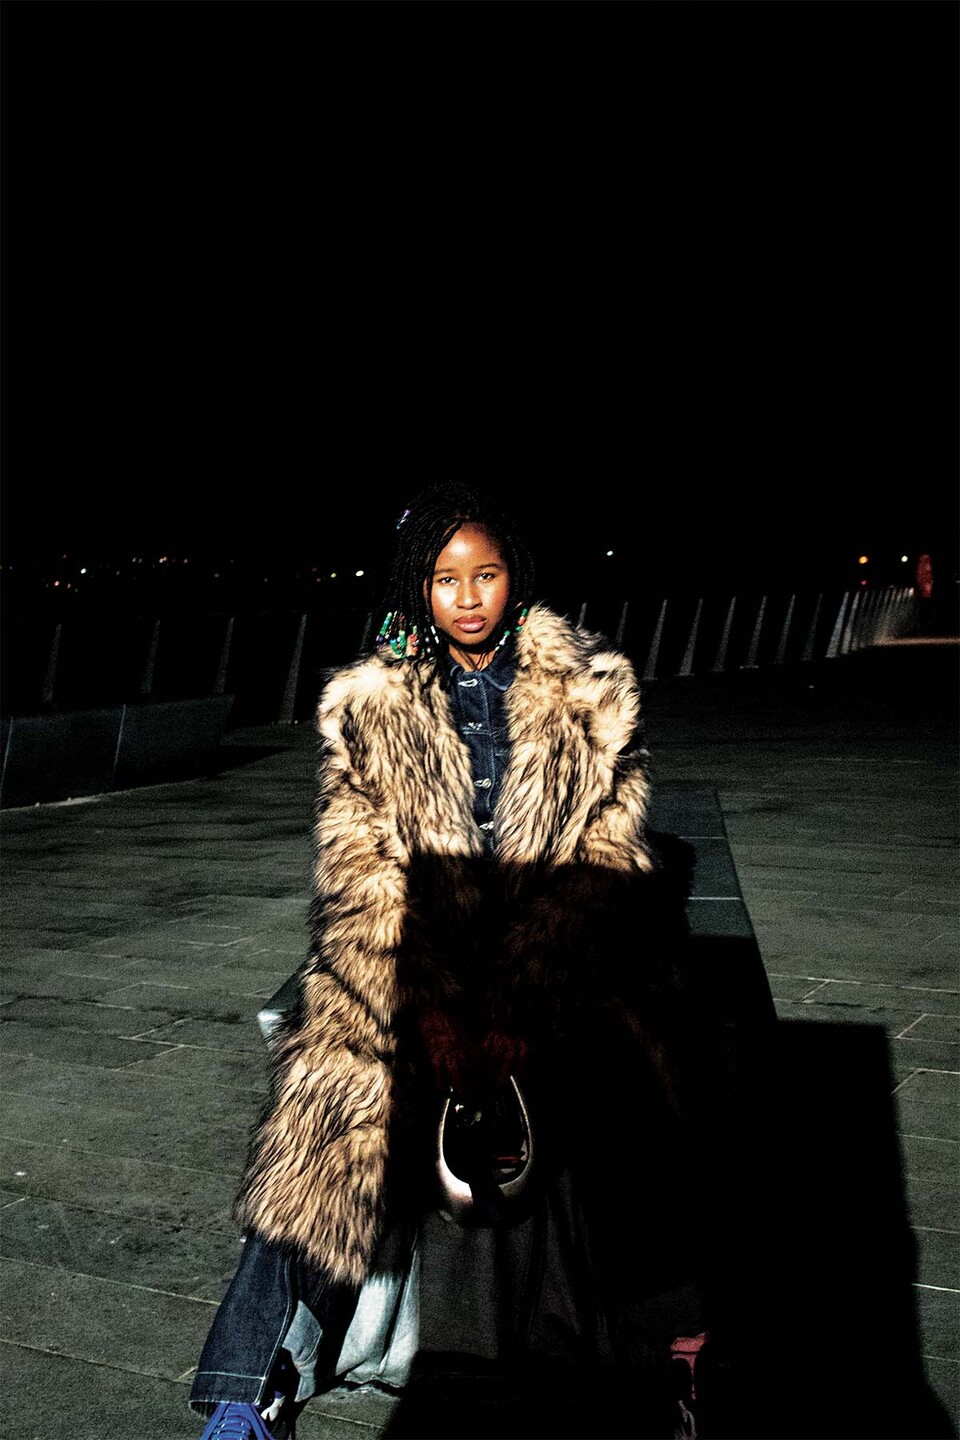 Young woman wearing denim jeans and shirt under a long fur coat holds a handbag in front of her at night on a riverside walkway